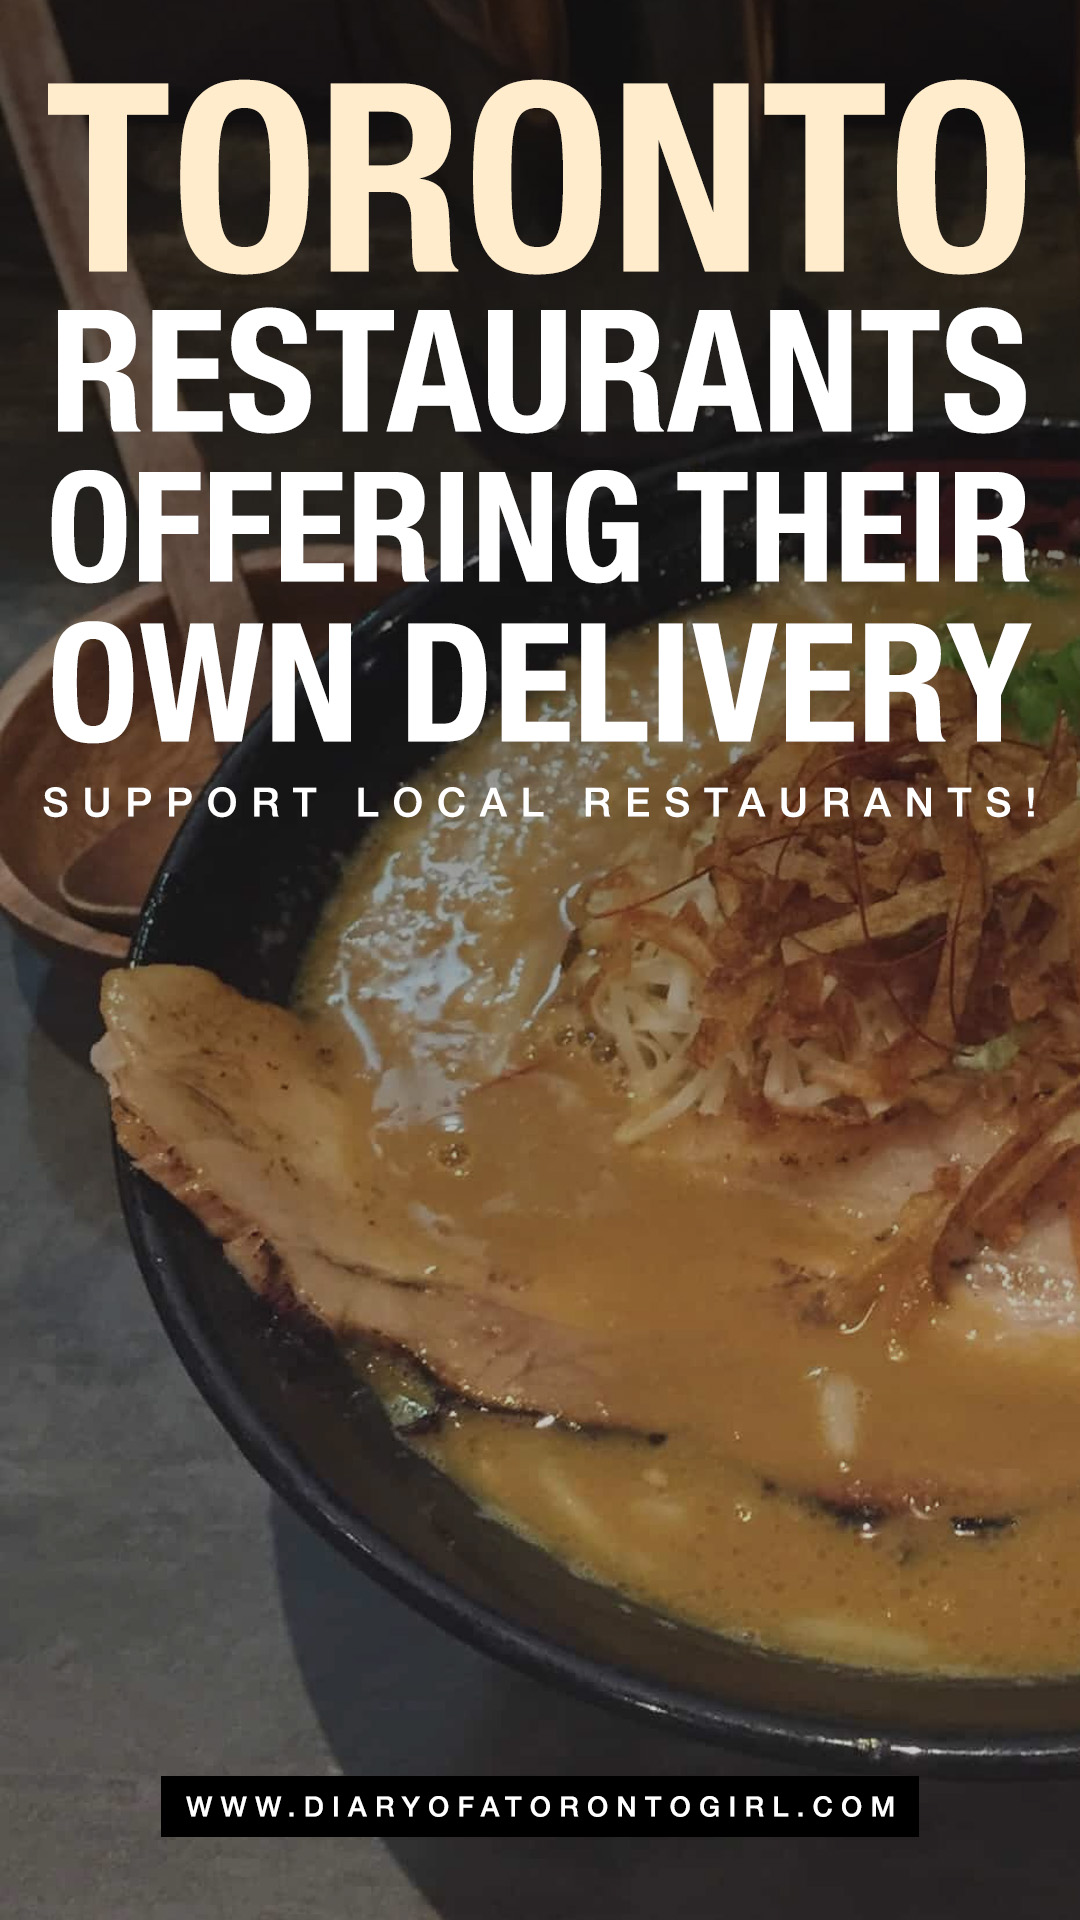 Toronto restaurants doing their own delivery